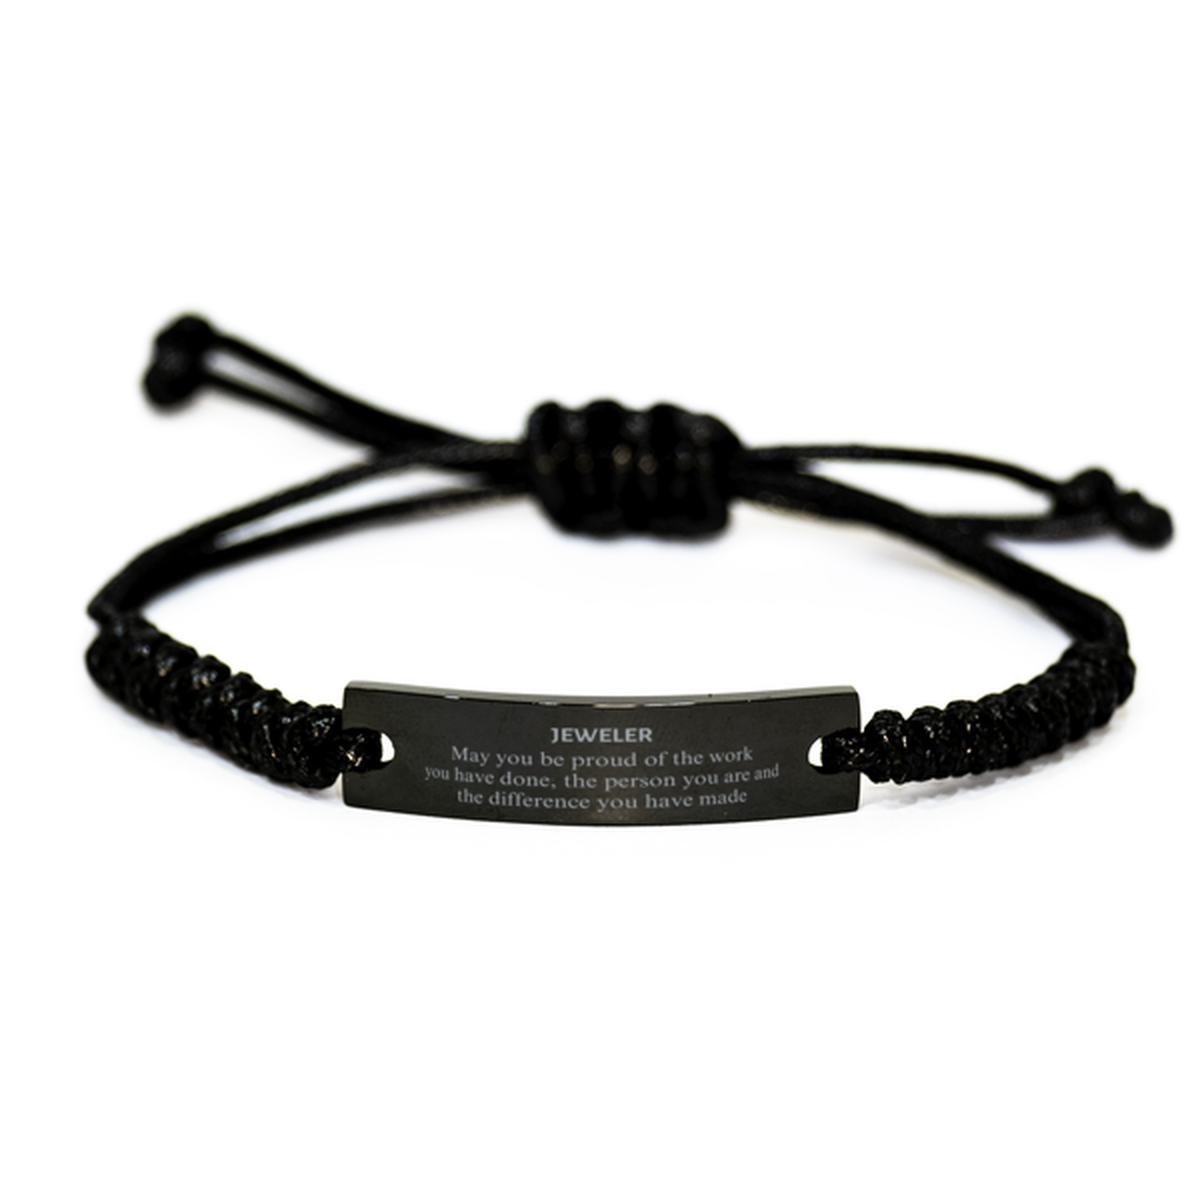 Jeweler May you be proud of the work you have done, Retirement Jeweler Black Rope Bracelet for Colleague Appreciation Gifts Amazing for Jeweler